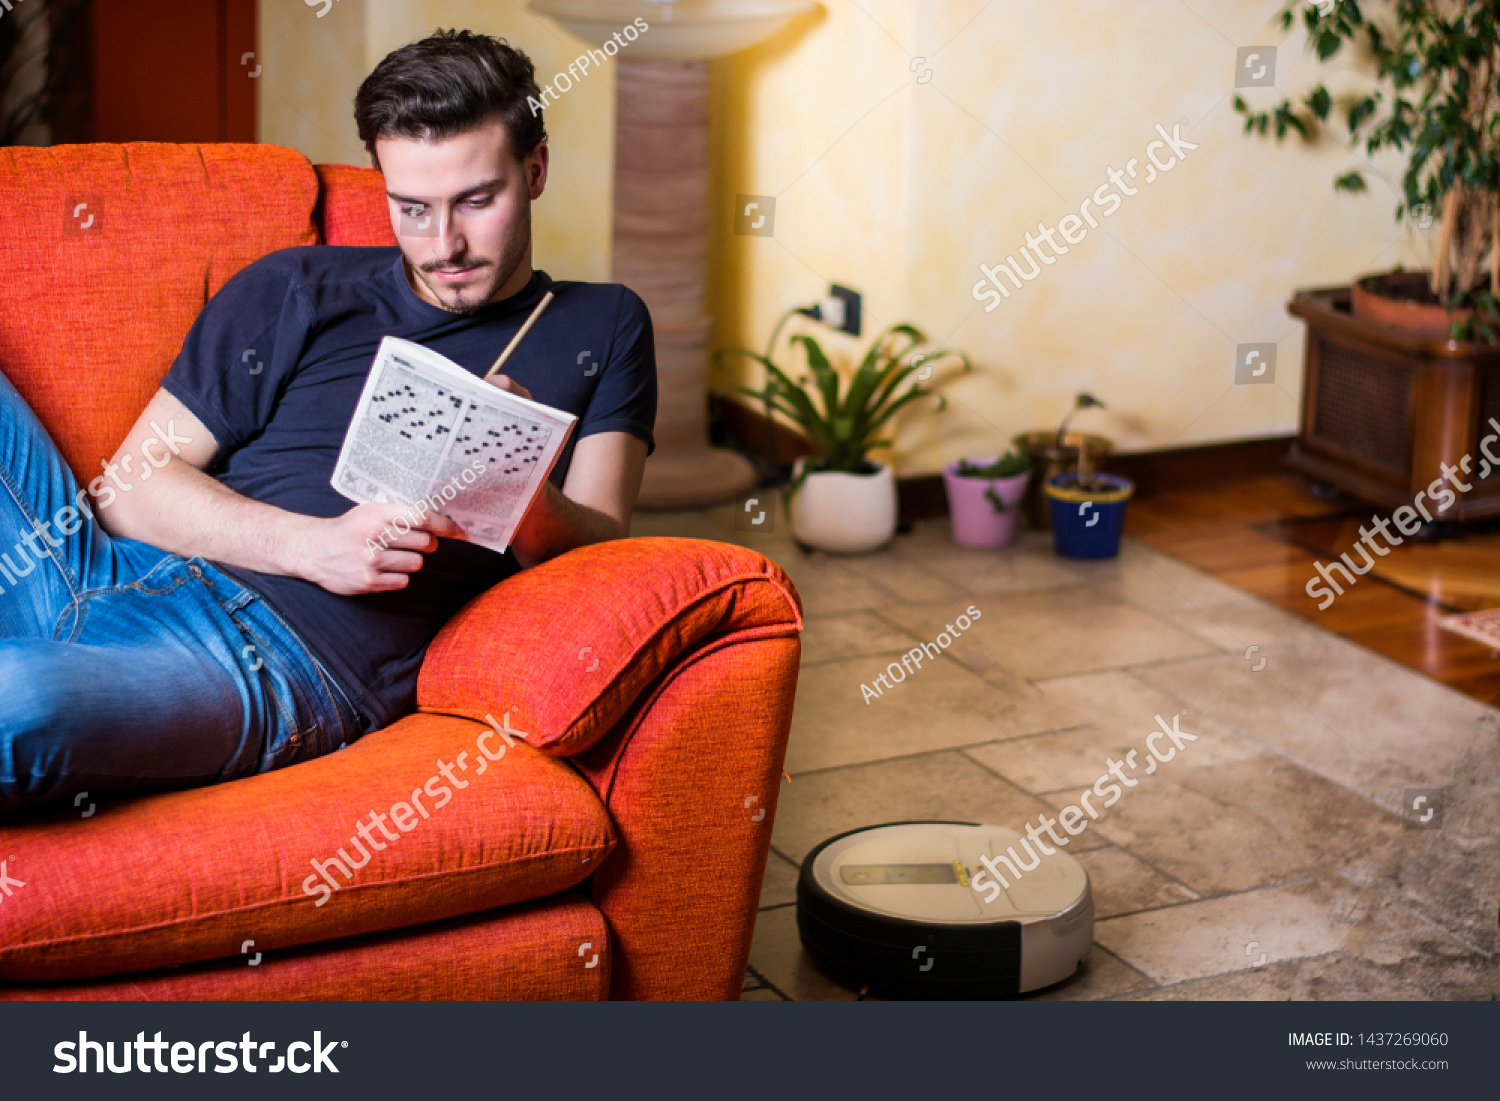 Young Man Sitting Doing Crossword Puzzle Royalty Free Stock Image